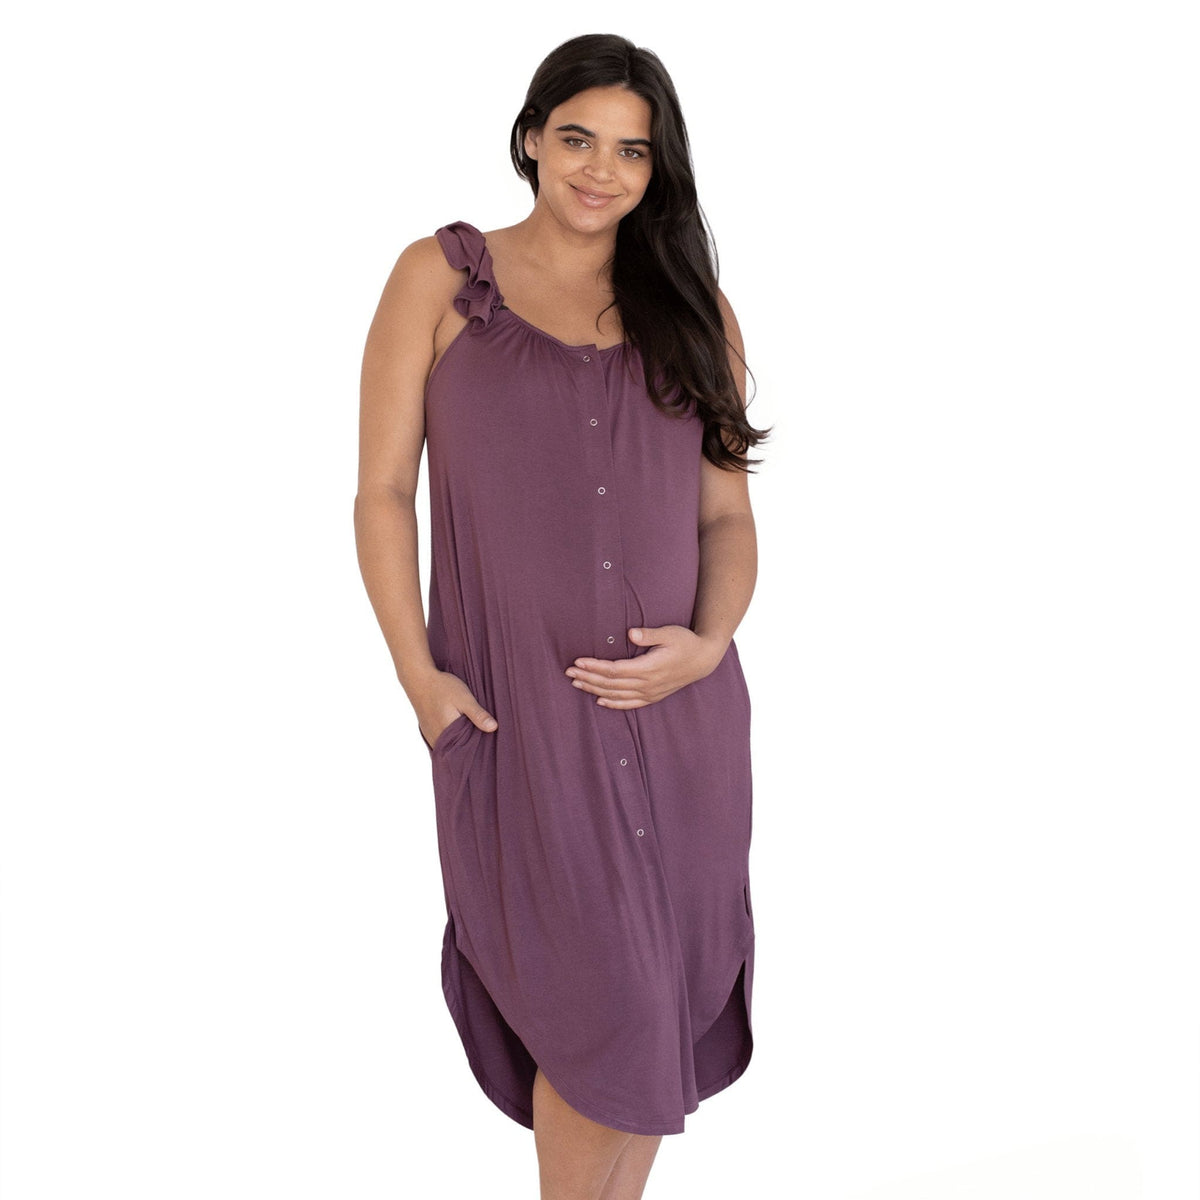 Kindred Bravely Labor and Delivery Gown Features: Velcro front, which opens  completely for skin-to-skin contact immediately u…